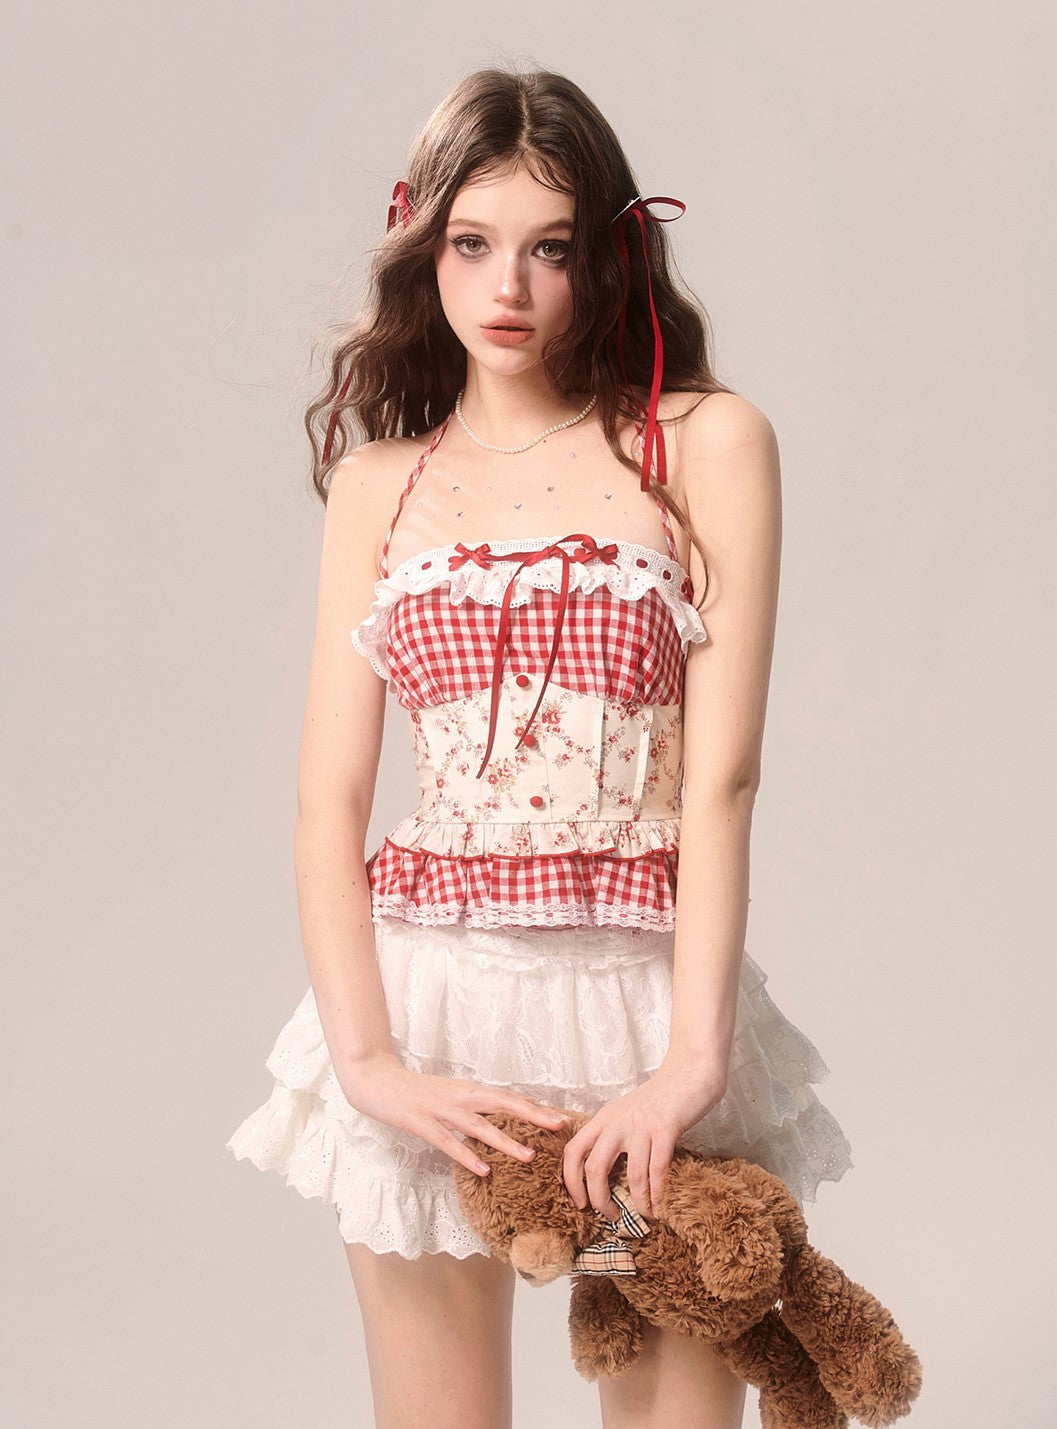 Strawberry Cake Red Plaid Lace Camisole DIA0068